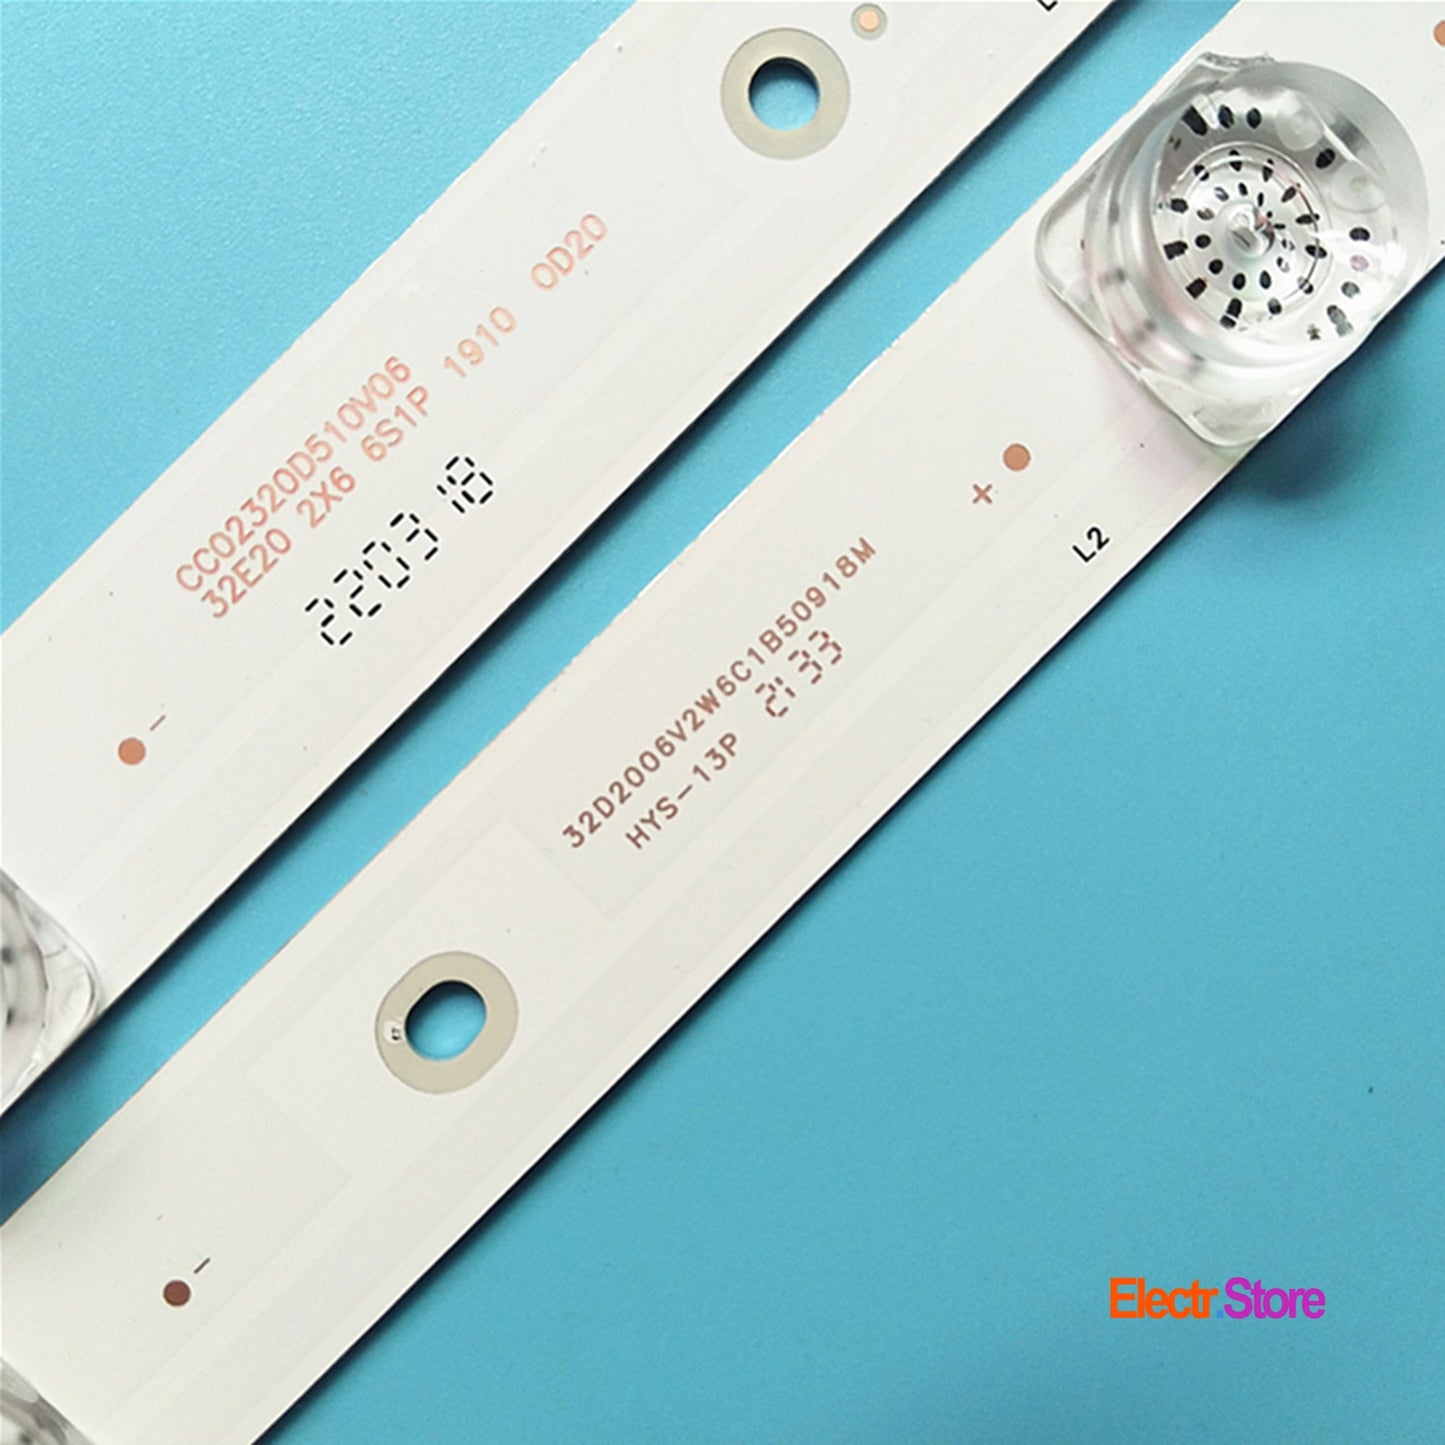 LED Backlight Strip Kits, CC02320D510V06 32E20 2x6 6S1P 1910 0D20, CC02320D510V09 32E20 2x6 6S1P 1410 0D20, MS-L2027 (2 pcs/kit), for TV 32" UNITED: 32DH58, 32DH68 32" CC02320D510V06 32e20 2x6 6s1p 1910 0d20 Dexp LED Backlights LEVEL Matrix Panda UNITED Electr.Store